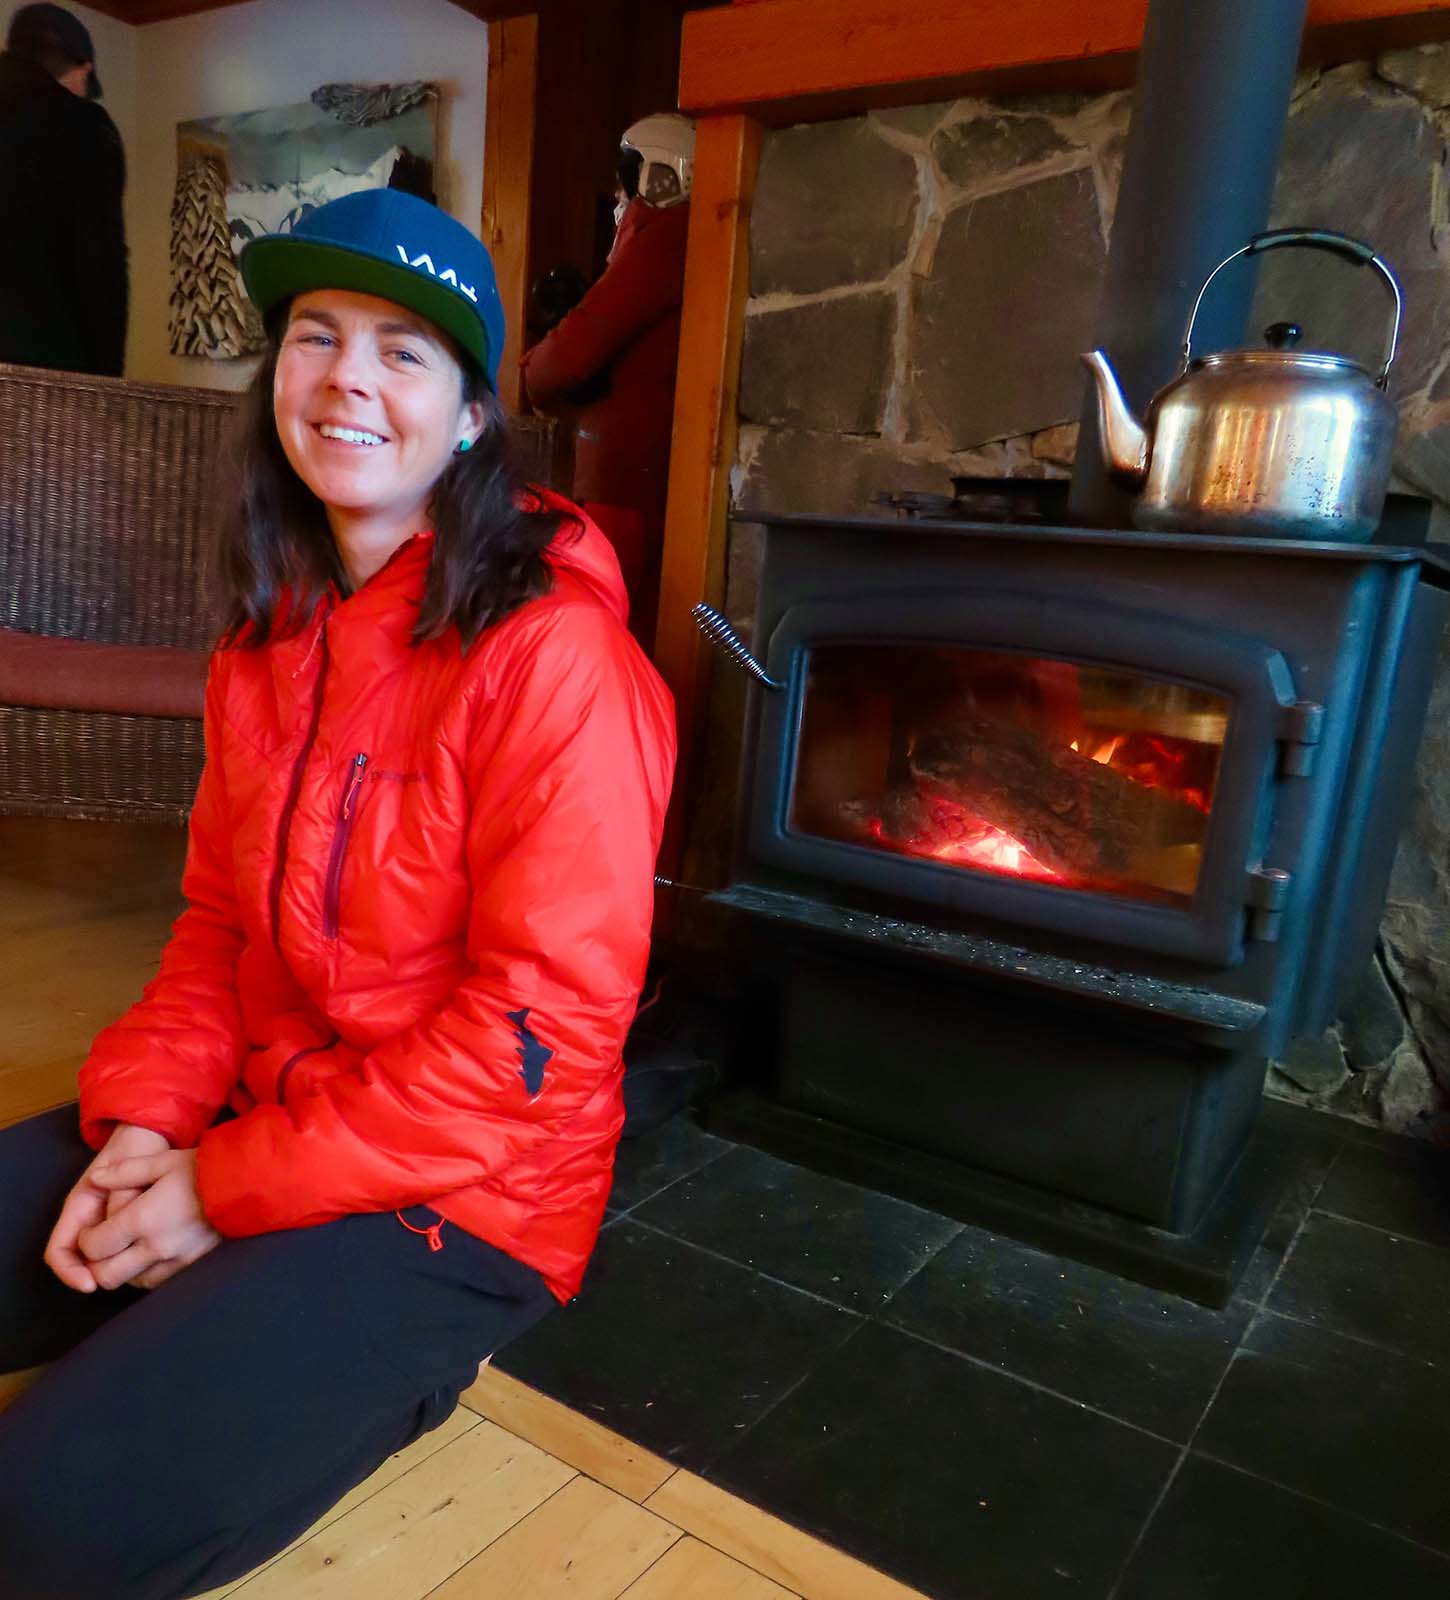 Skier seated beside indoor fireplace